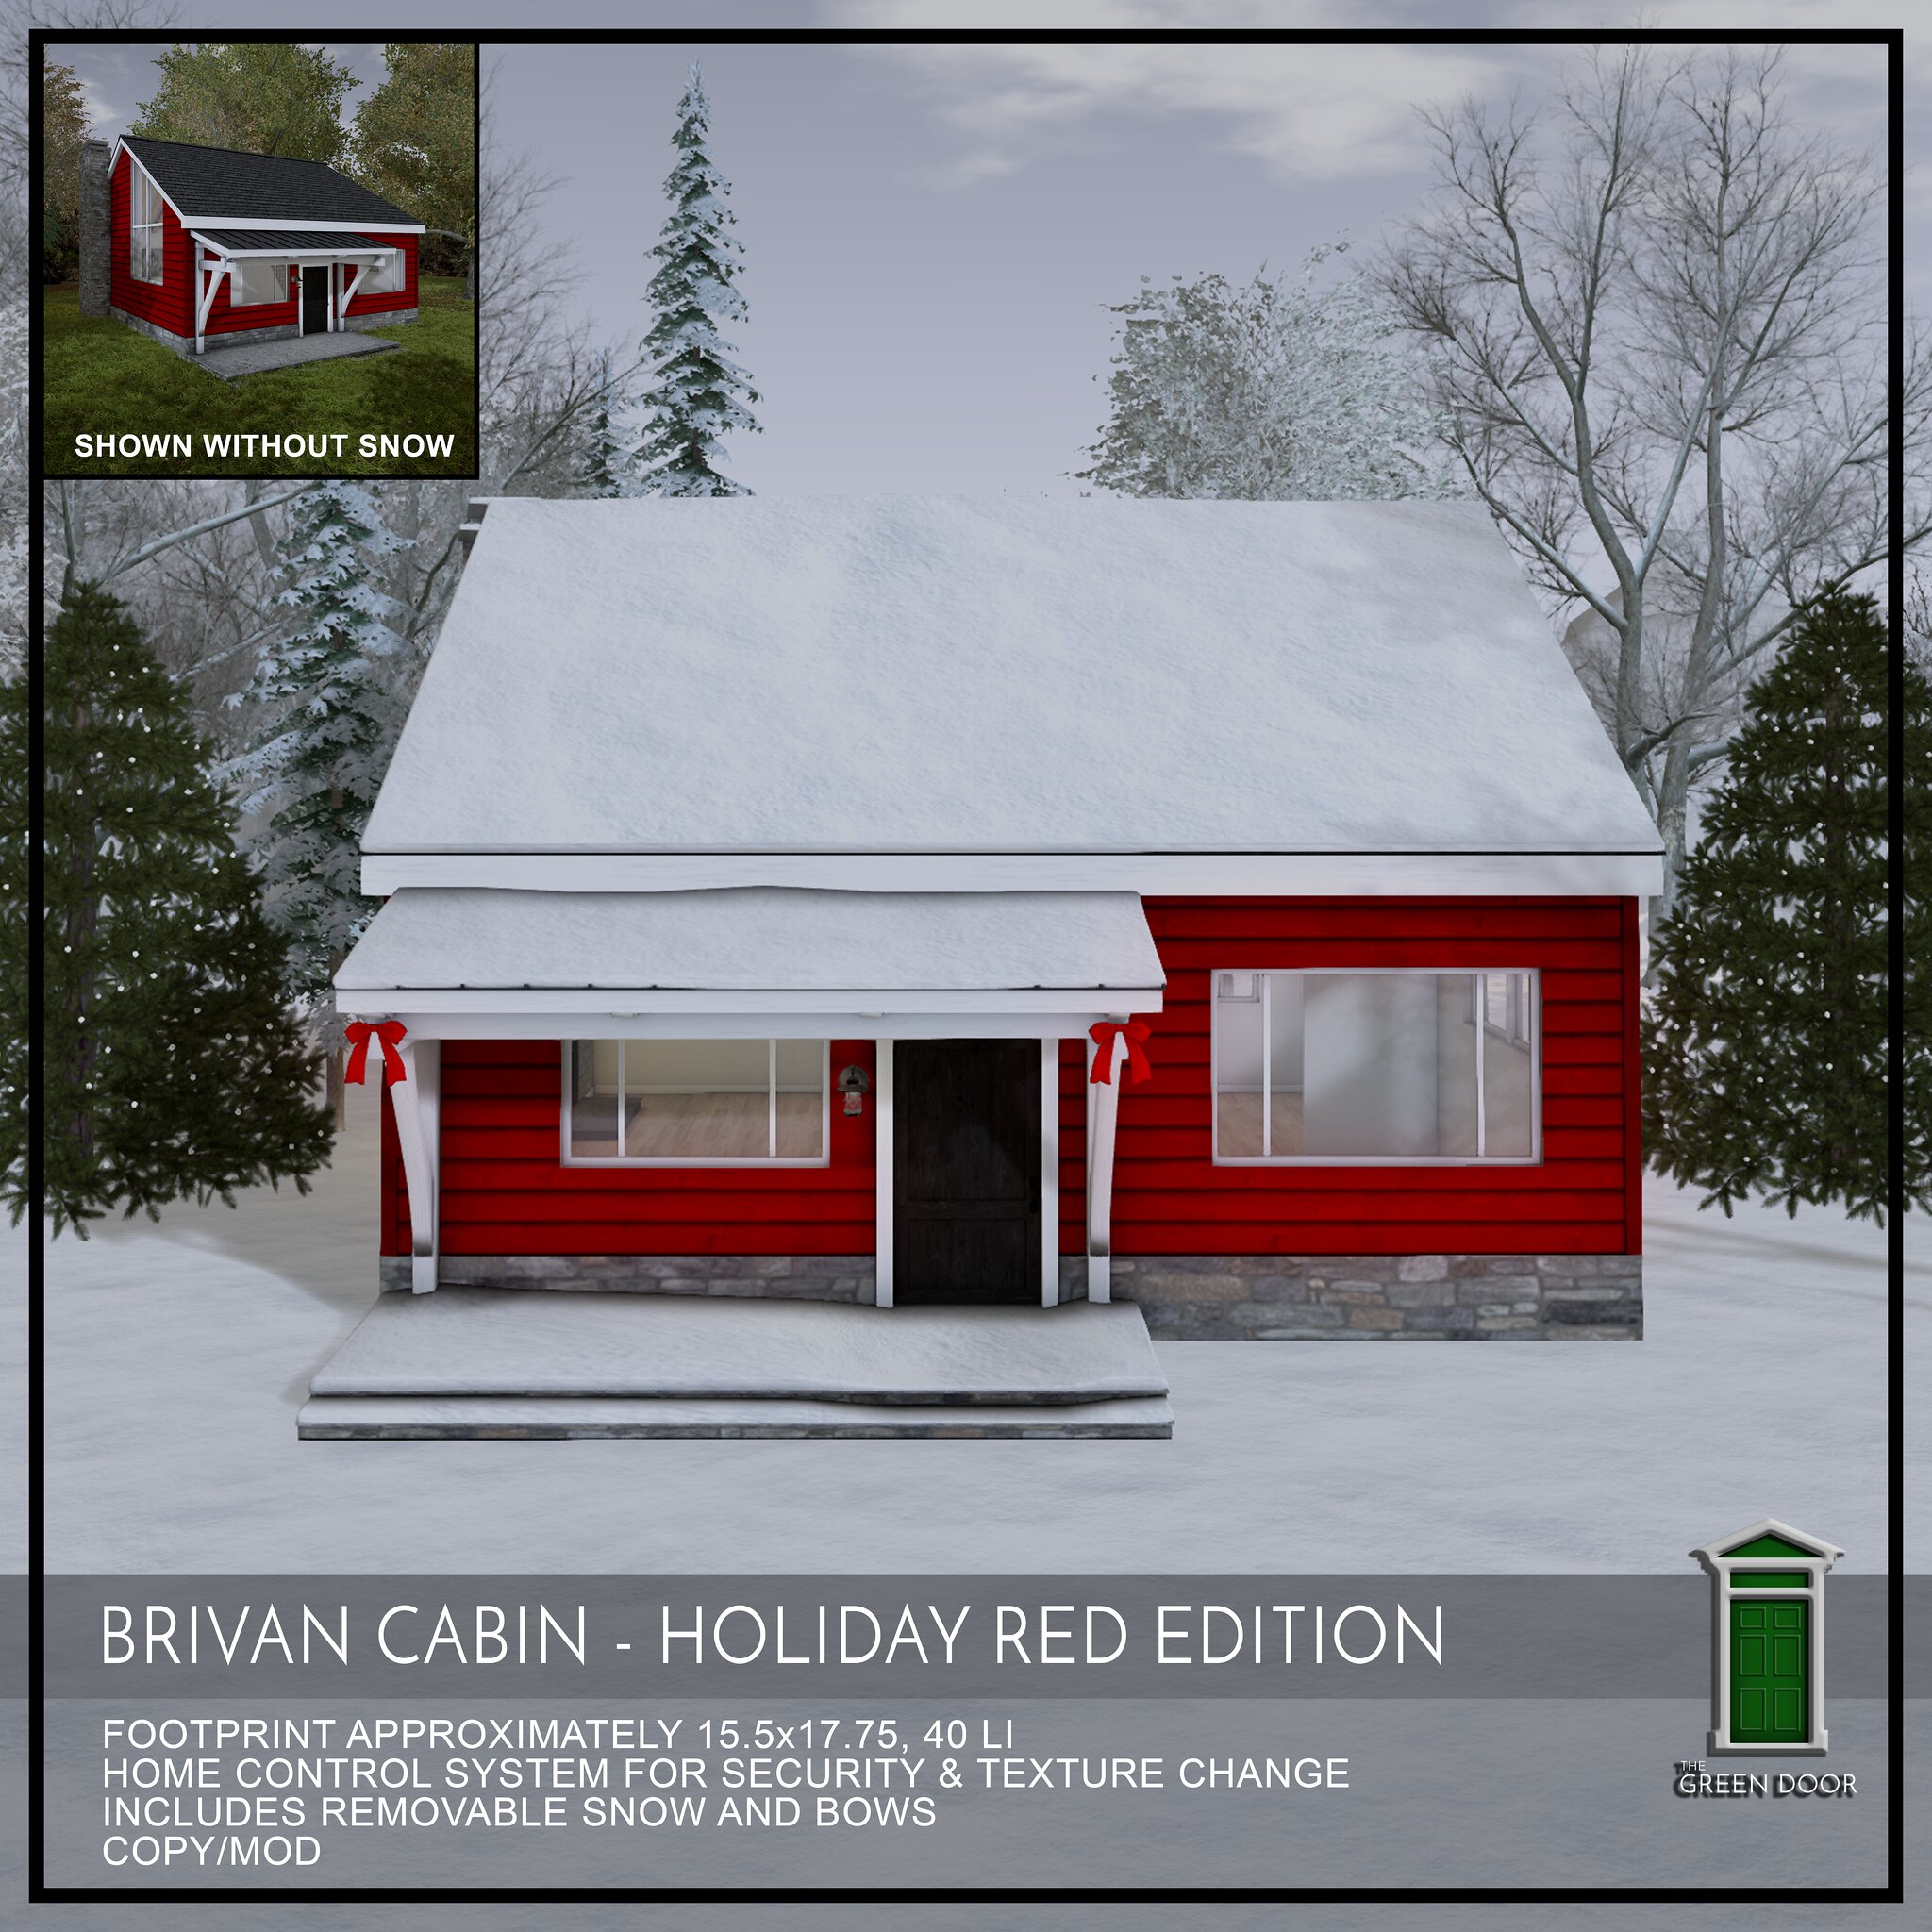 The Green Door – Brivan Cabin – Holiday Red Edition